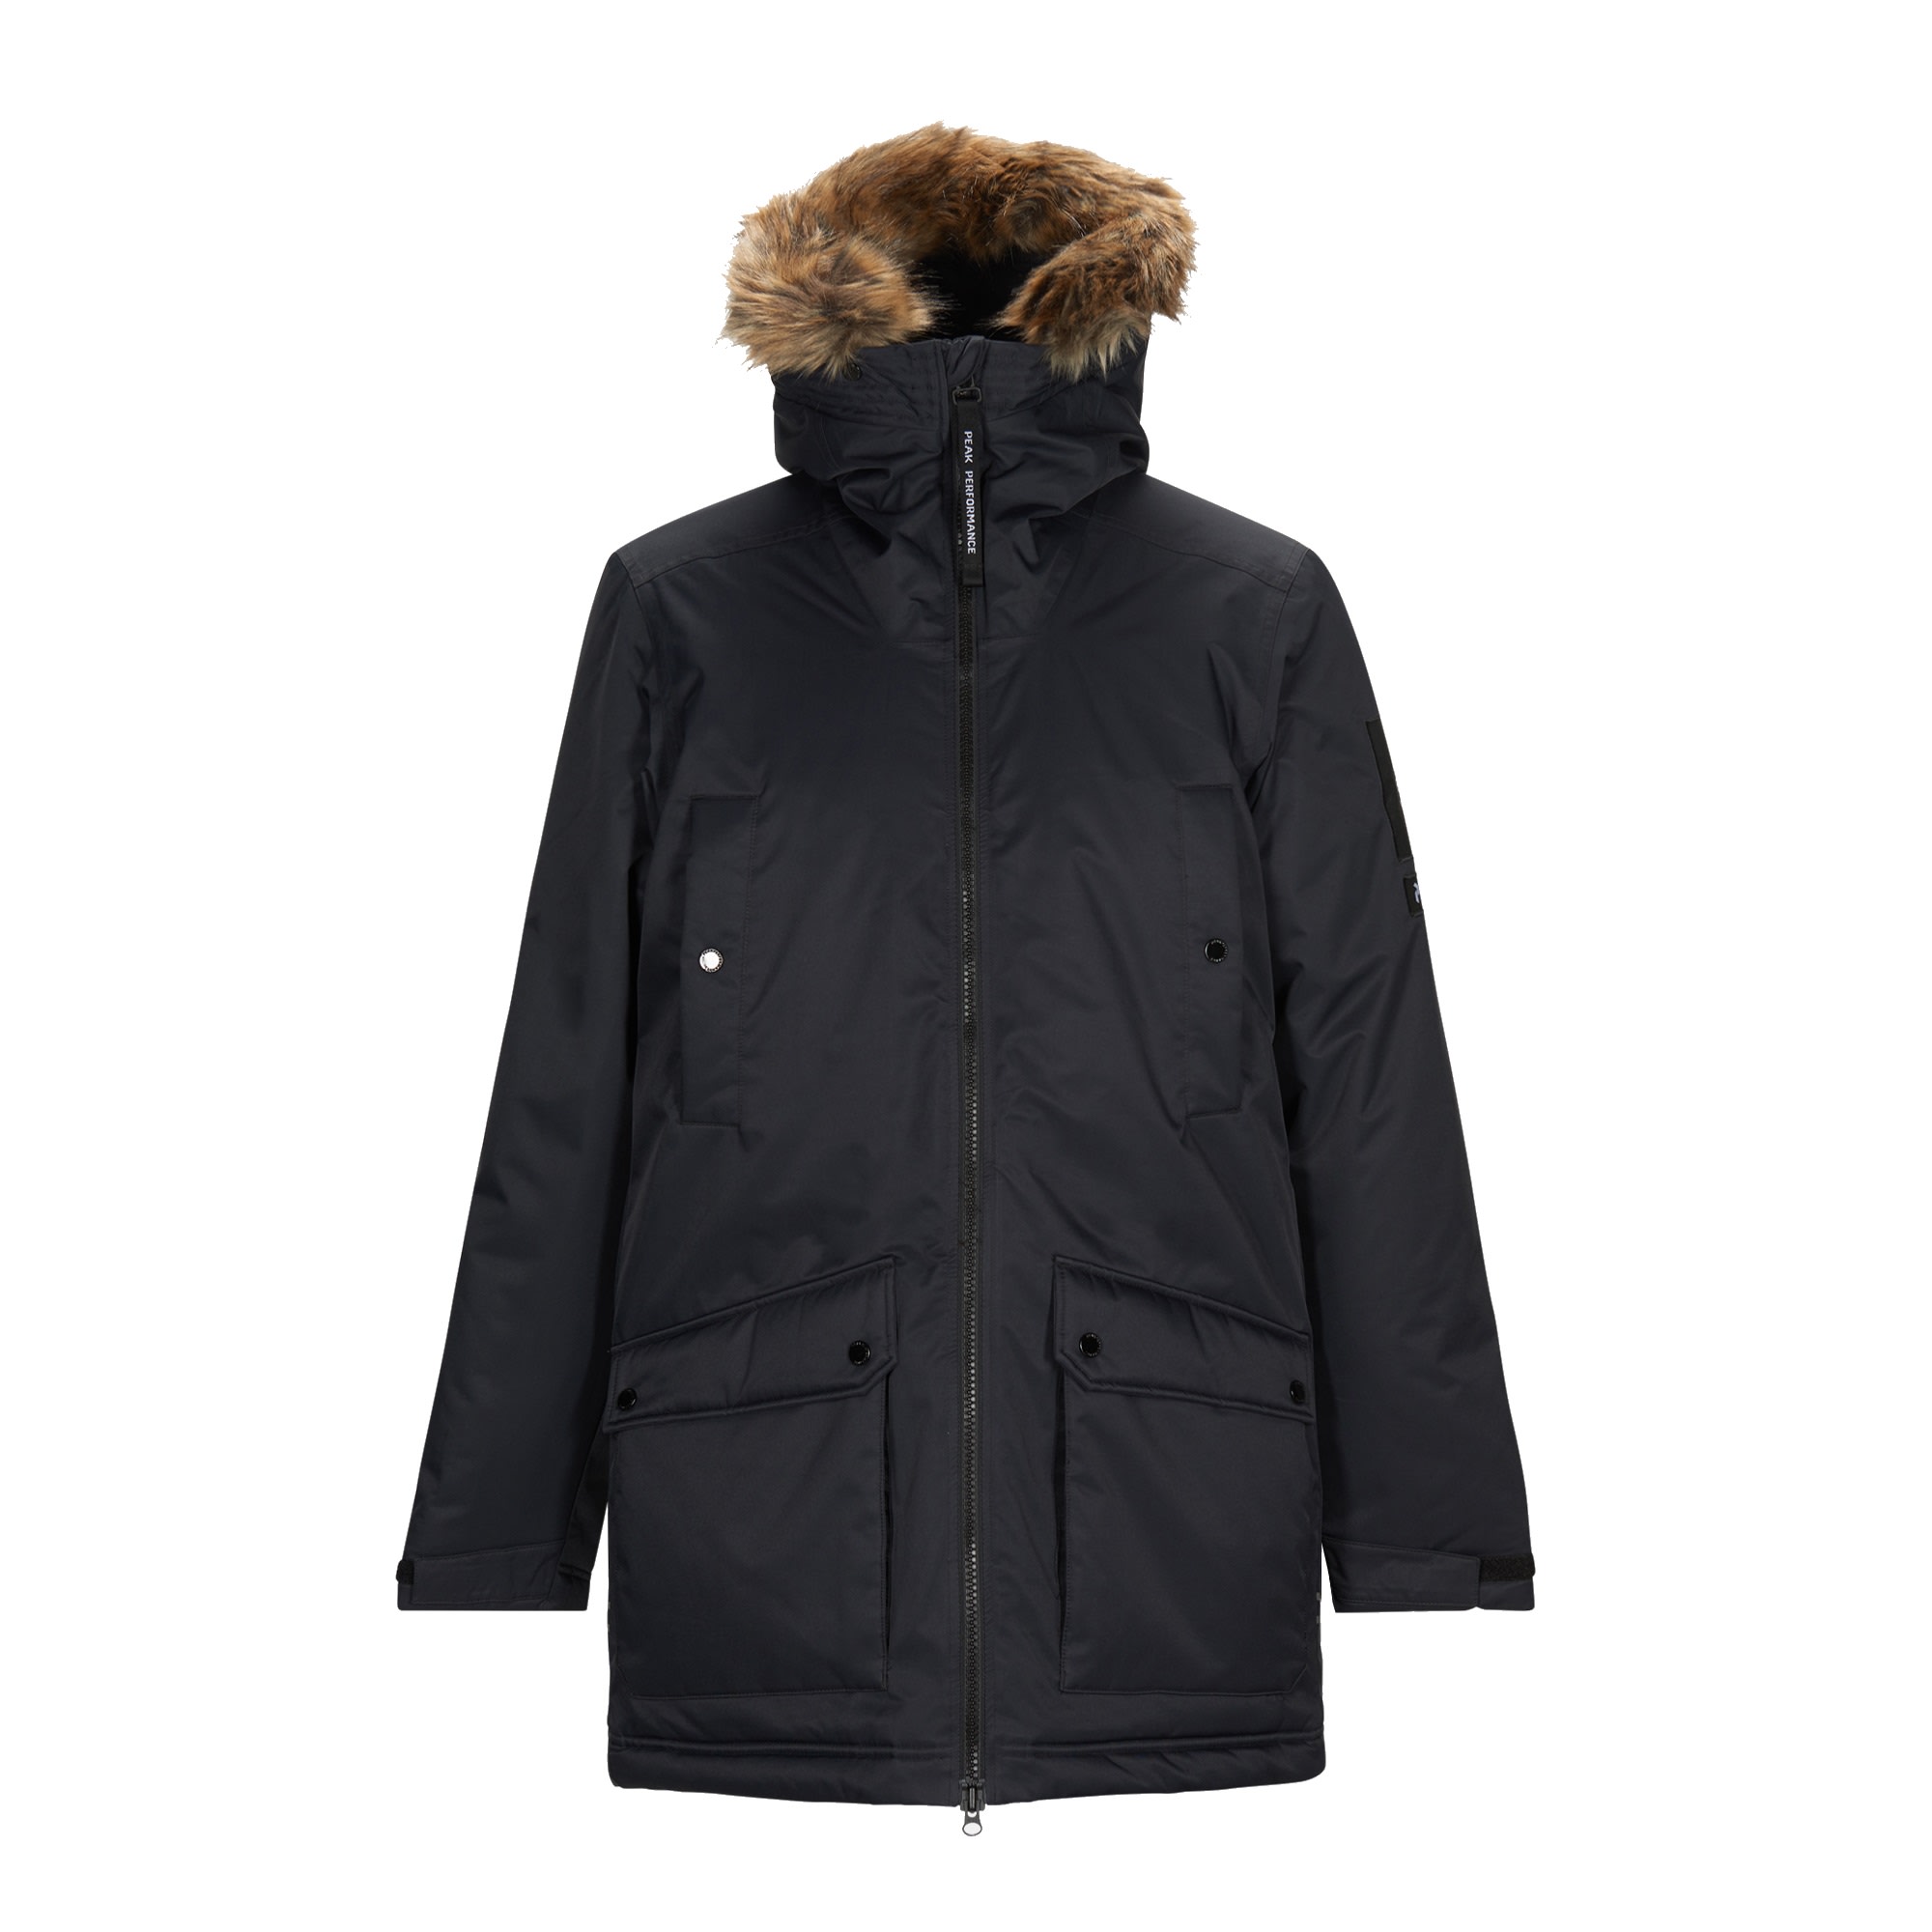 Buy Peak Performance Men's Local Parka from Outnorth